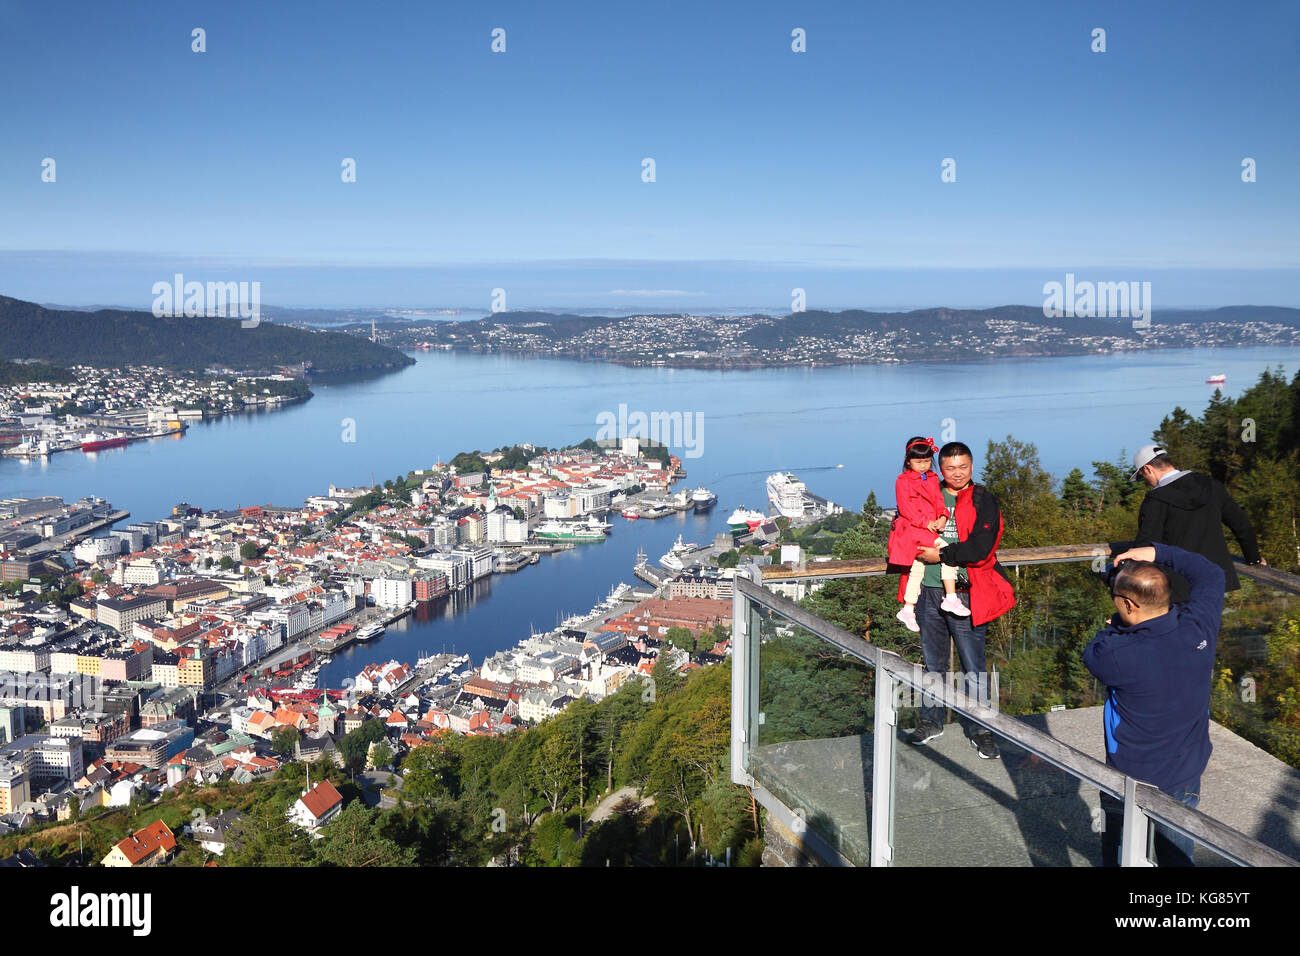 Tourists take photographs at the viewing point at Mount Floyen above Bergen, Norway Stock Photo